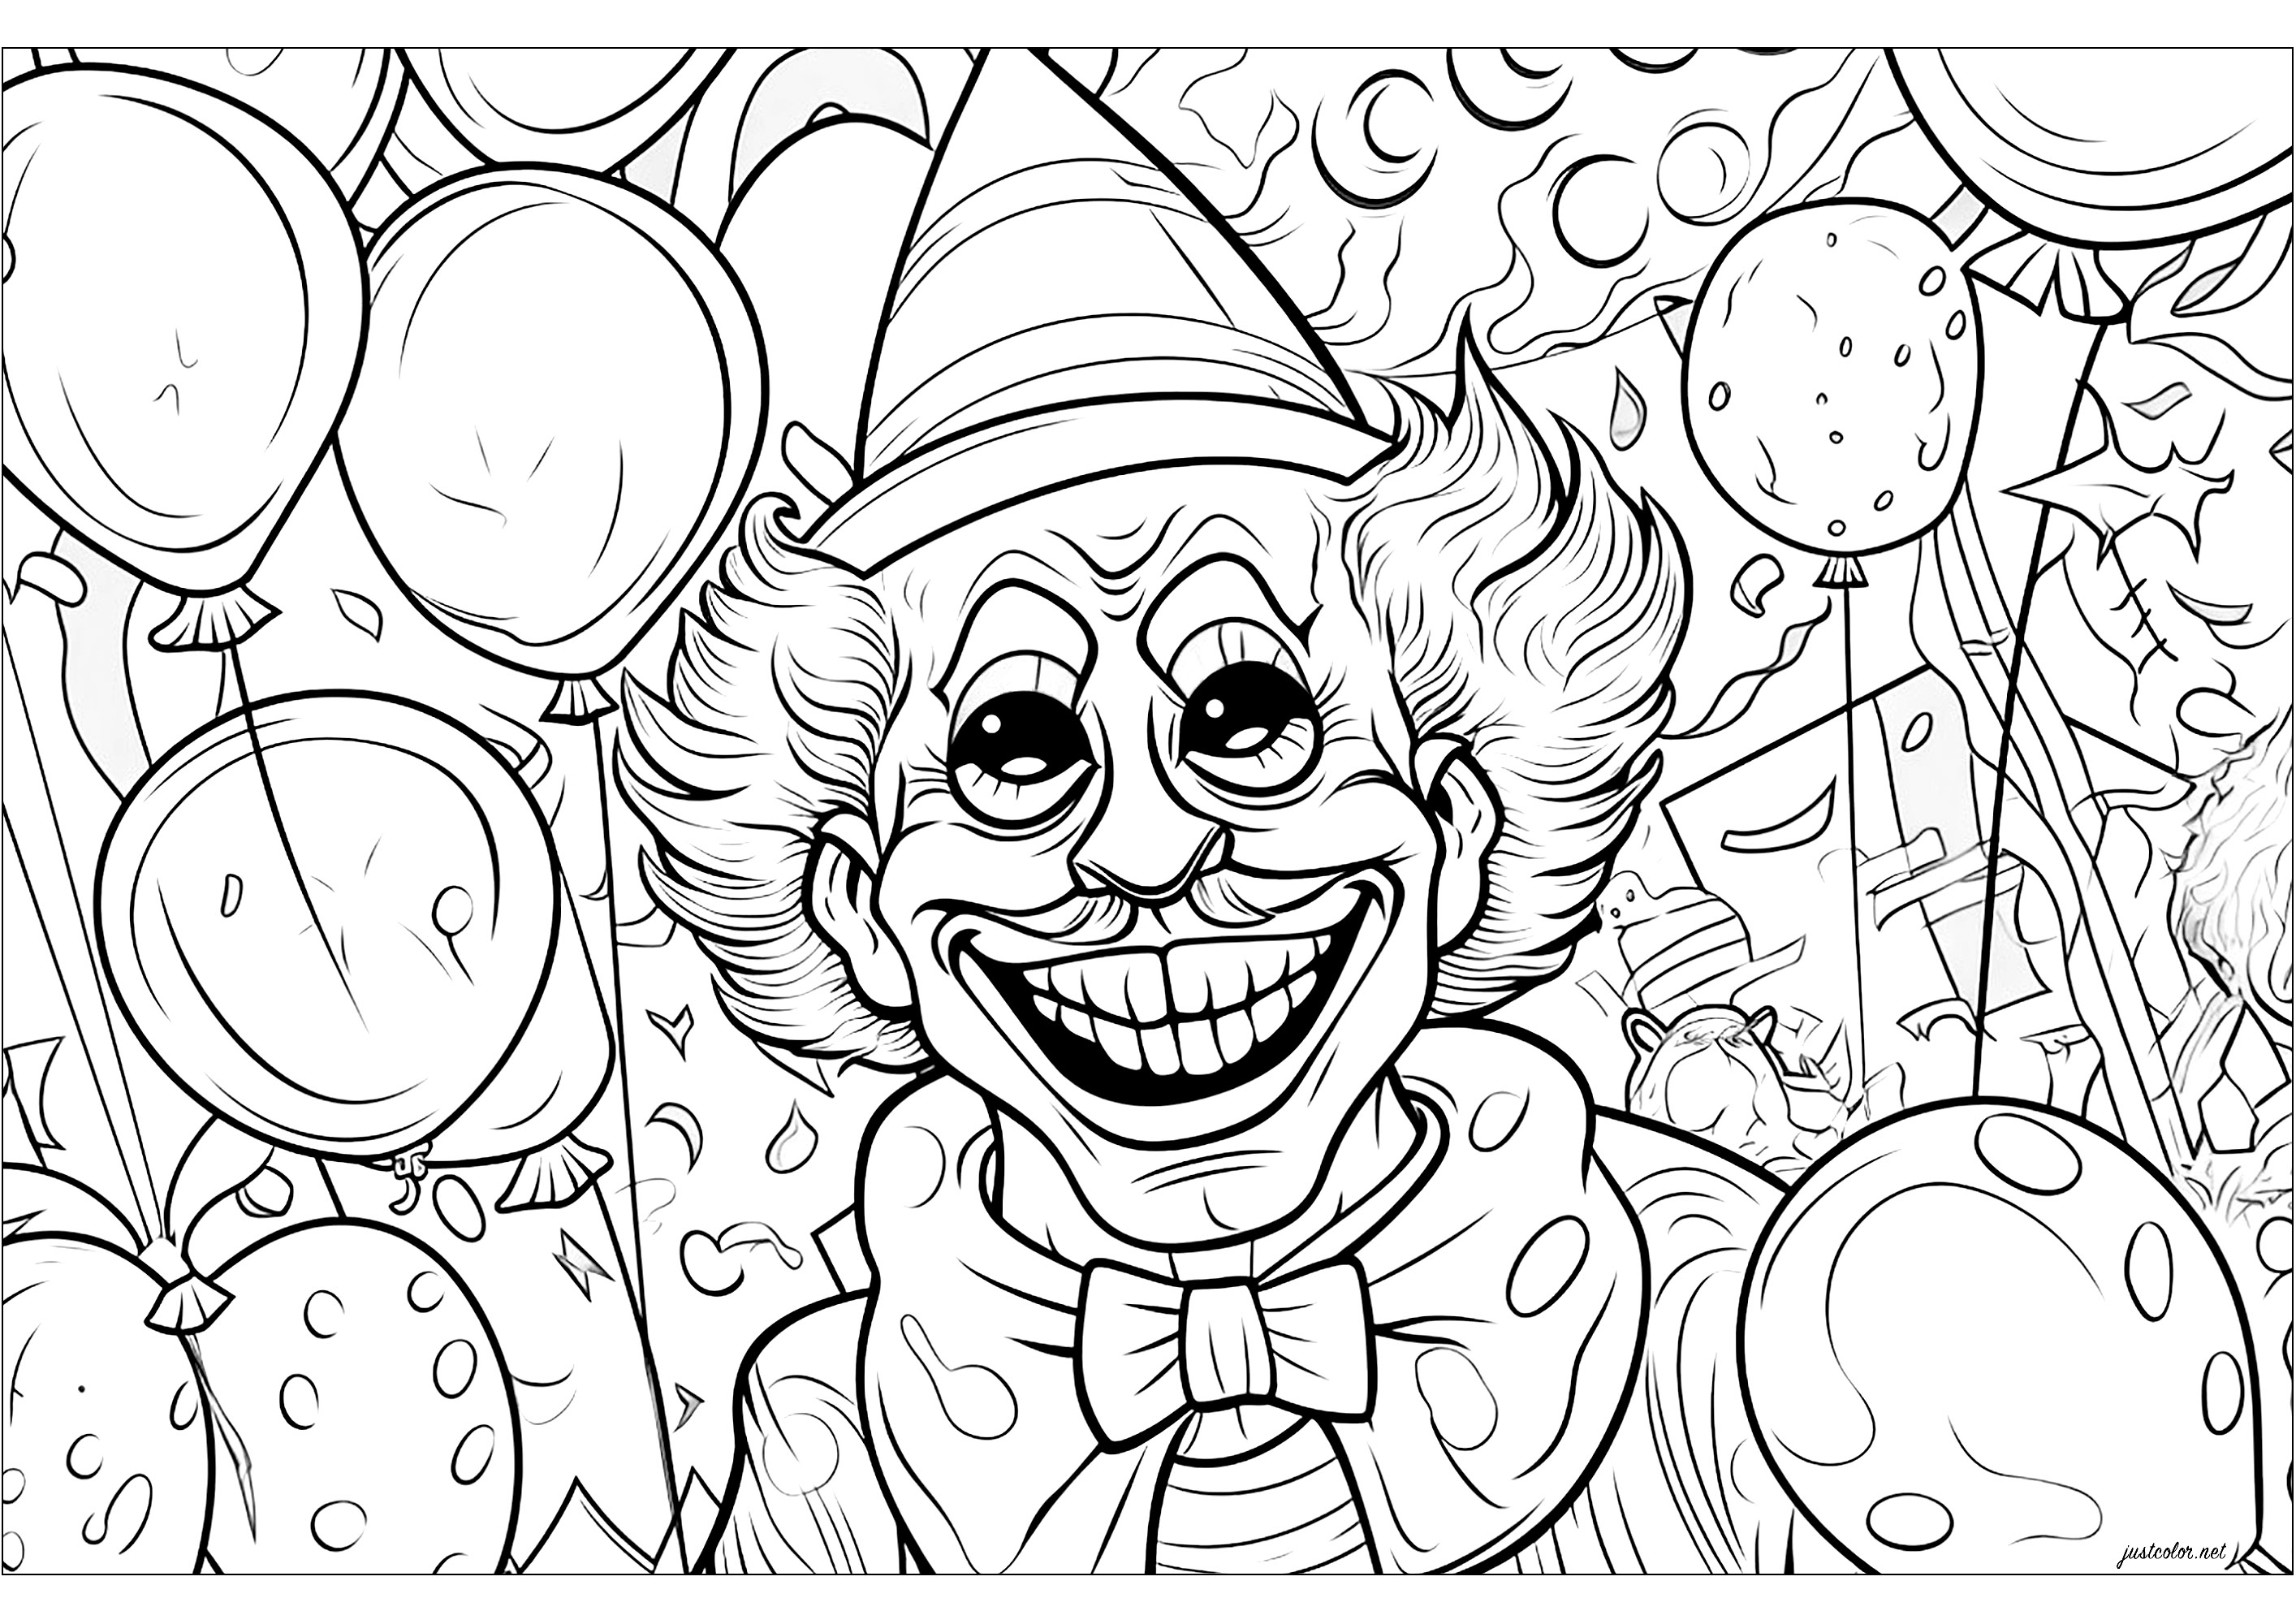 How to Draw a Scary Clown - Really Easy Drawing Tutorial